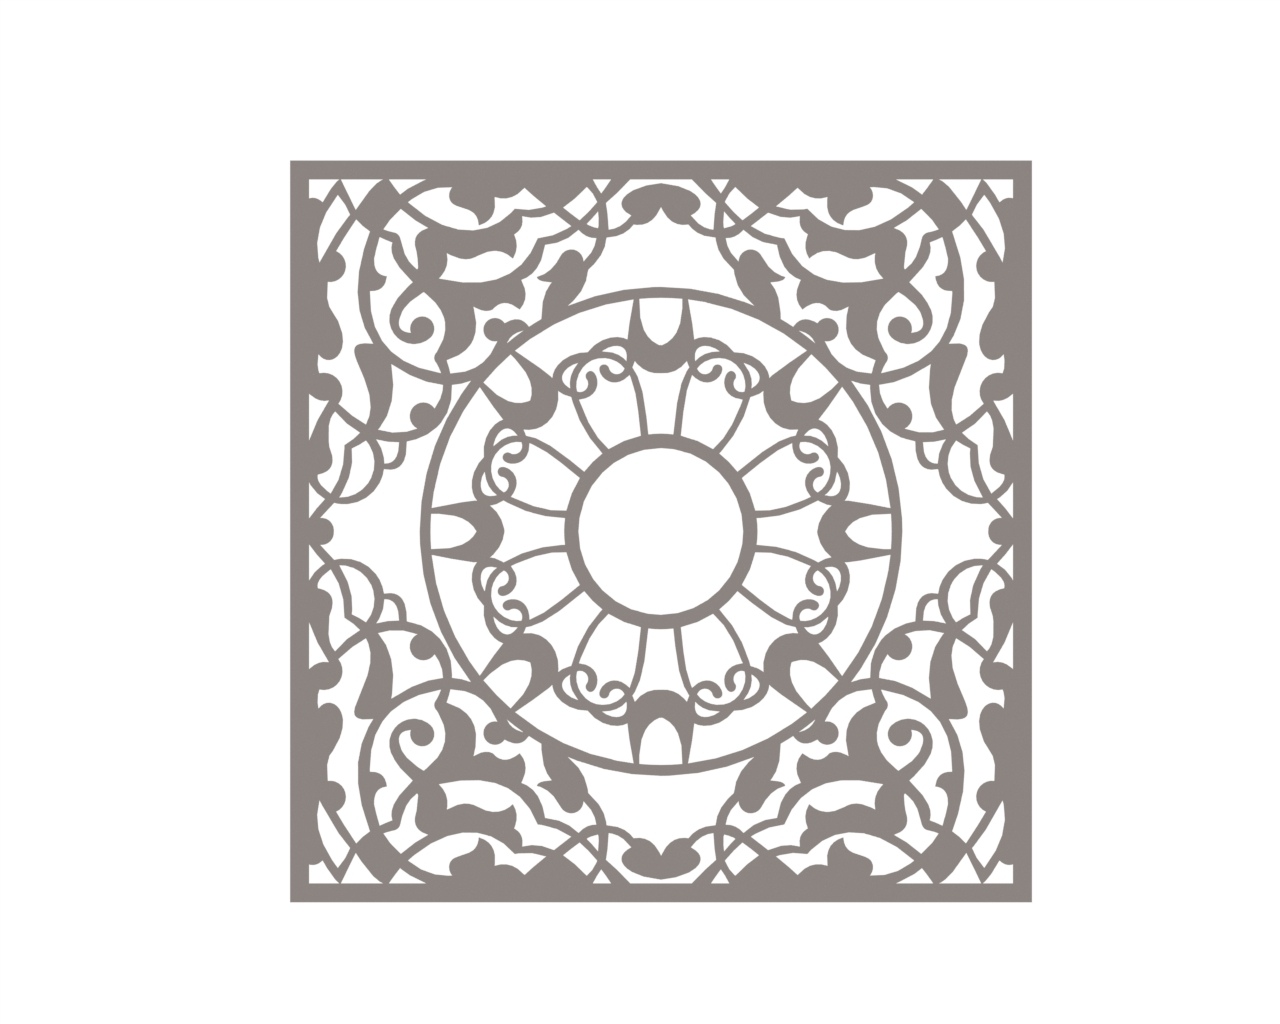 Download Vector Mandala DXF File Free Download - 3axis.co